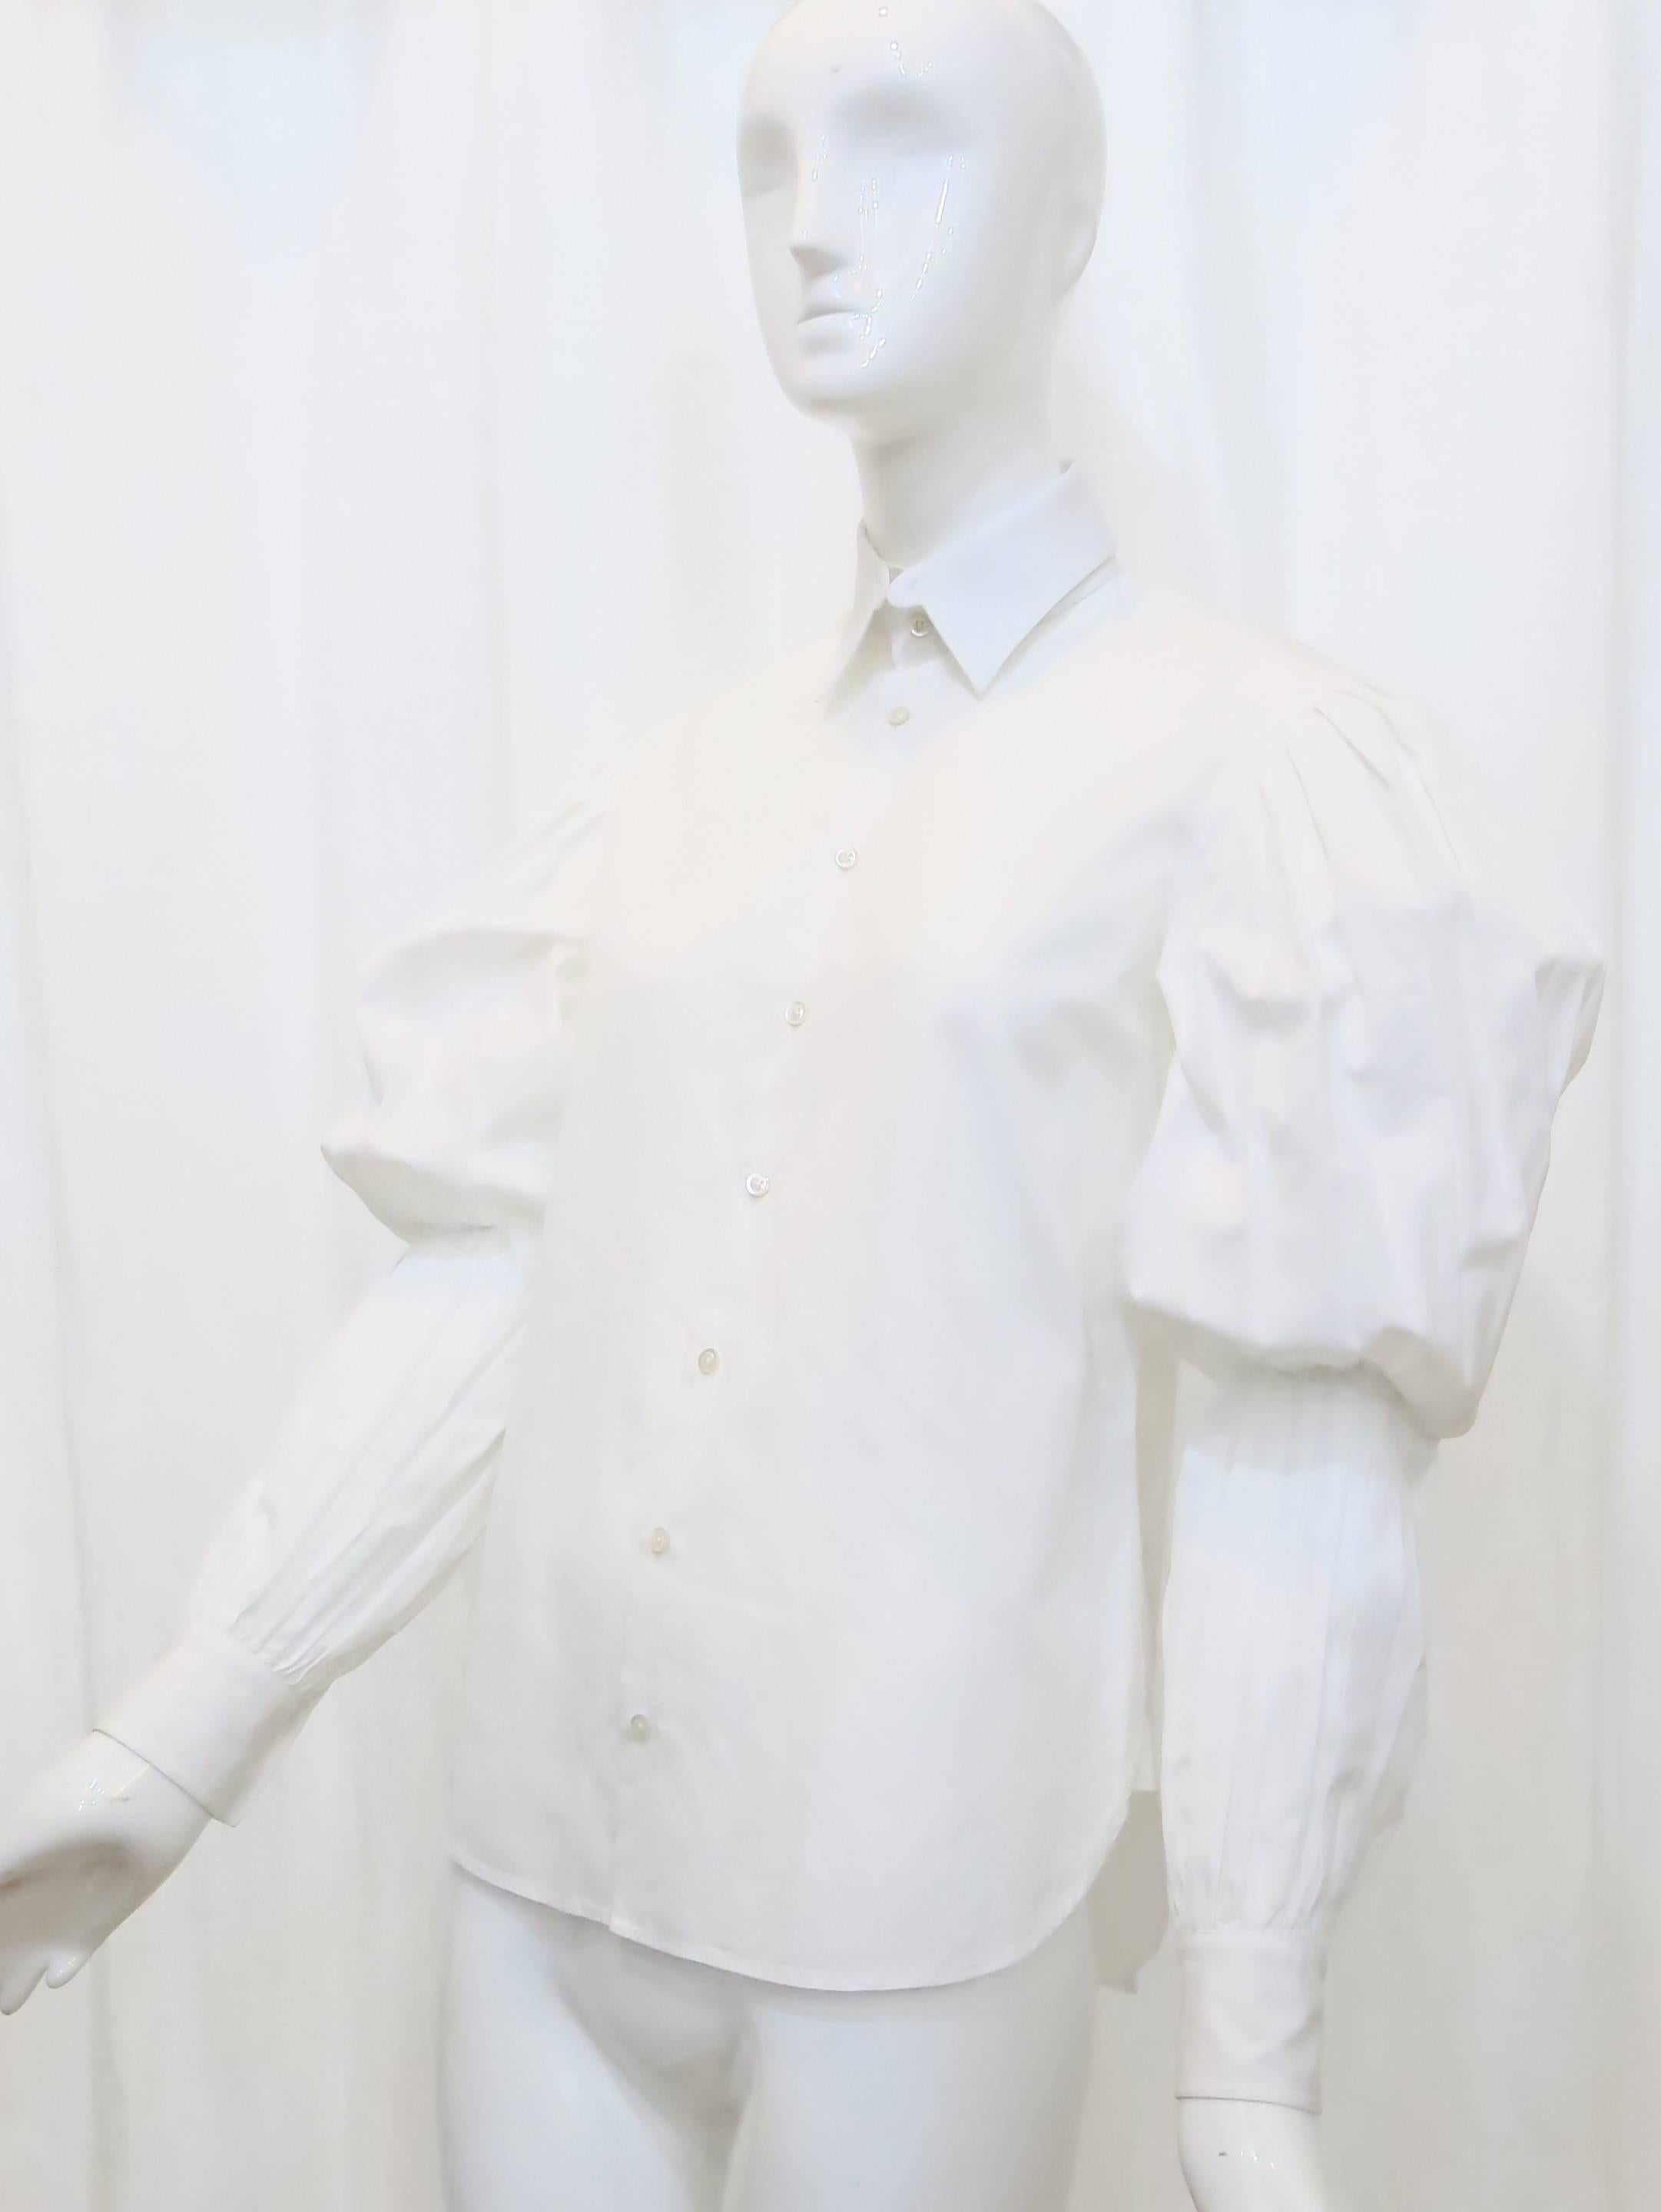 This exquisite Ralph Lauren Purple Label white button down blouse features voluminous, pleated gigot sleeves and mother-of-pearl style buttons.

Size marked: 4 (US)

*Please contact dealer prior to purchase for white glove shipping options*
